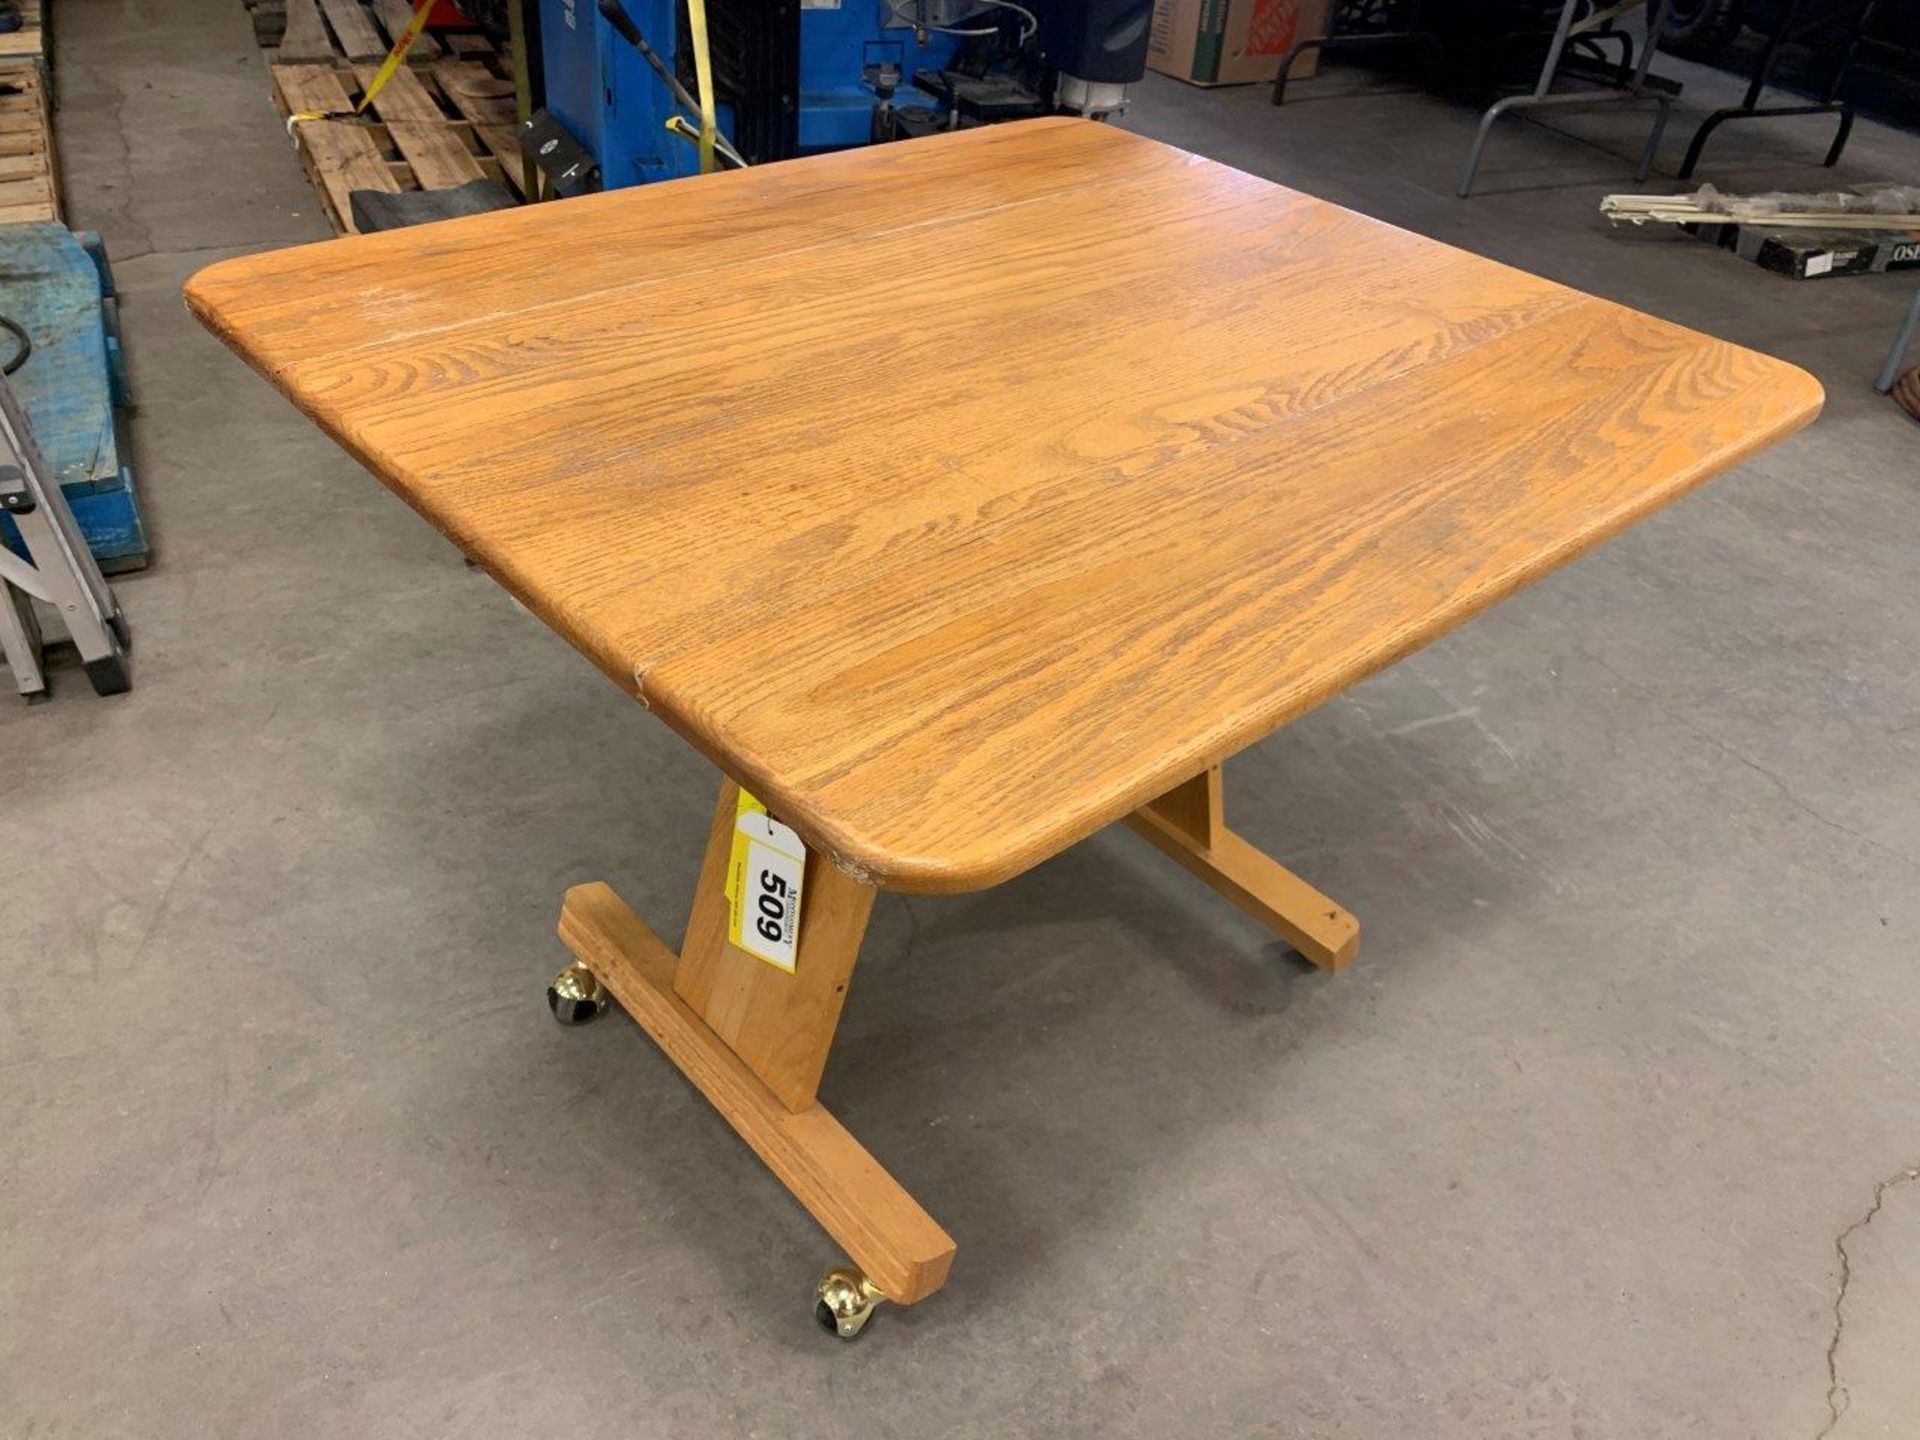 OAK ROLLING ADJUSTABLE HEIGHT TABLE 36X32X18-27" - Image 2 of 4